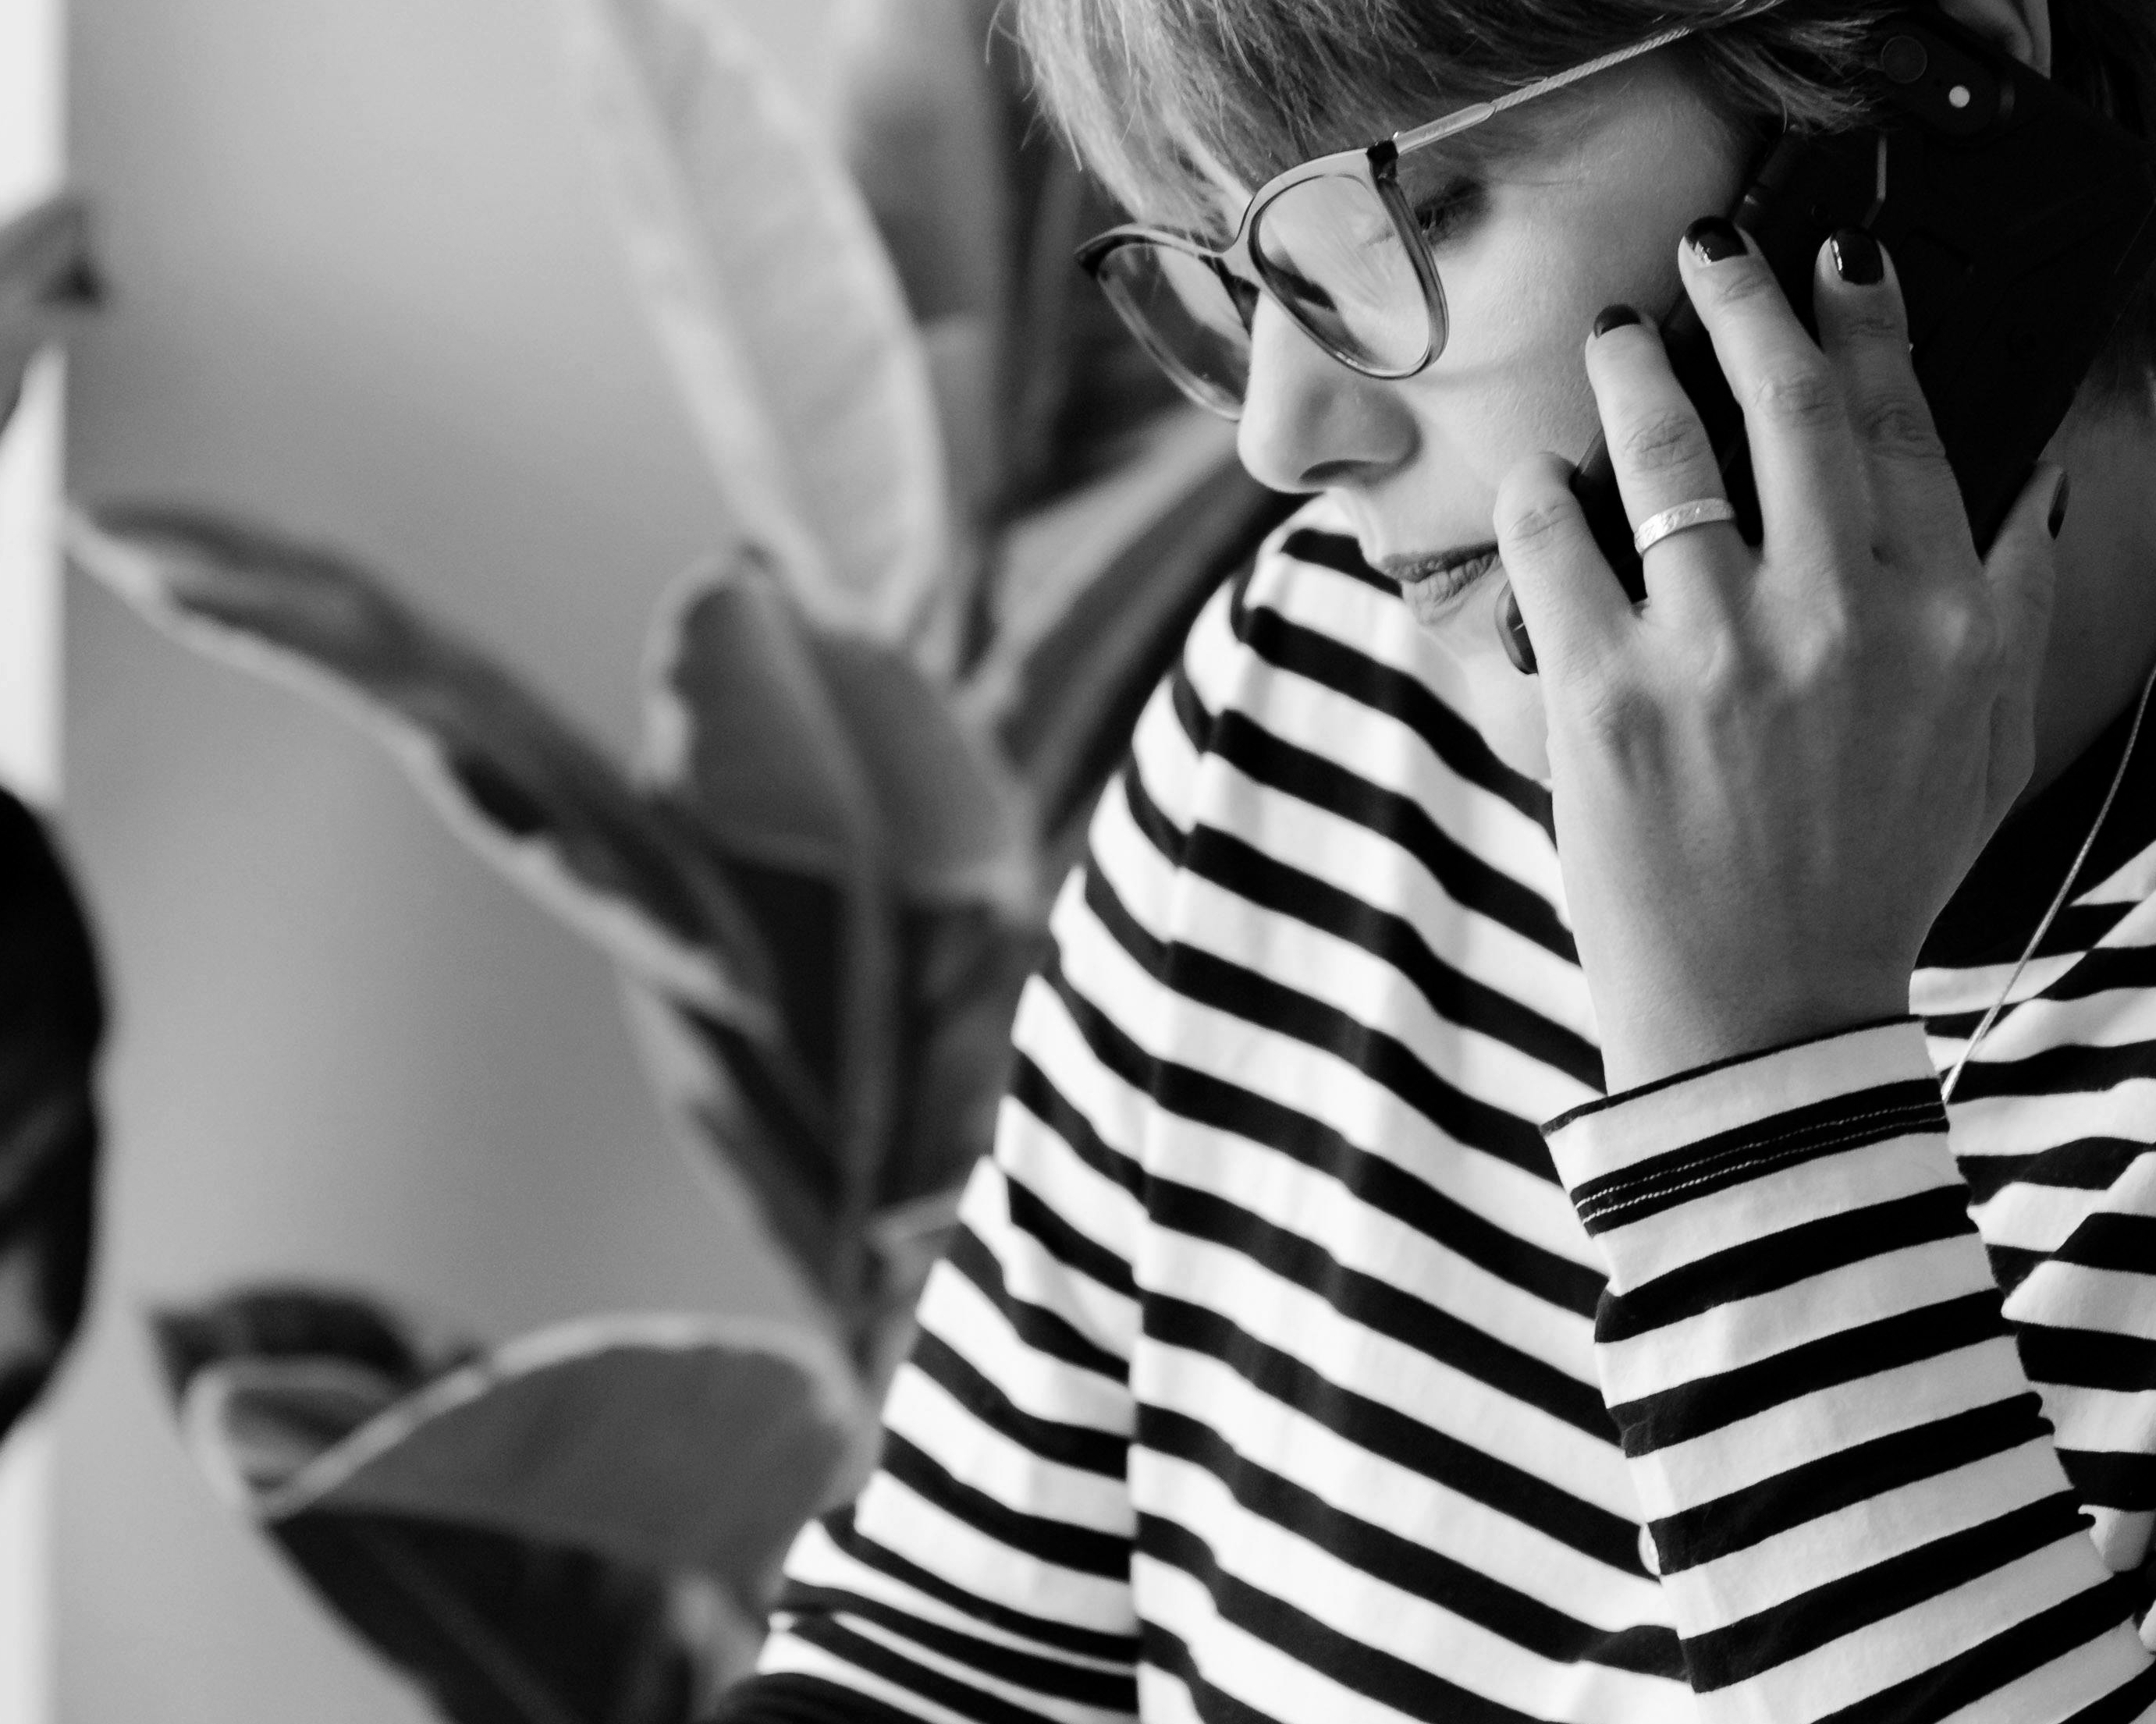 Ruth makes a phone call to her friend Carla | Source: Pexels